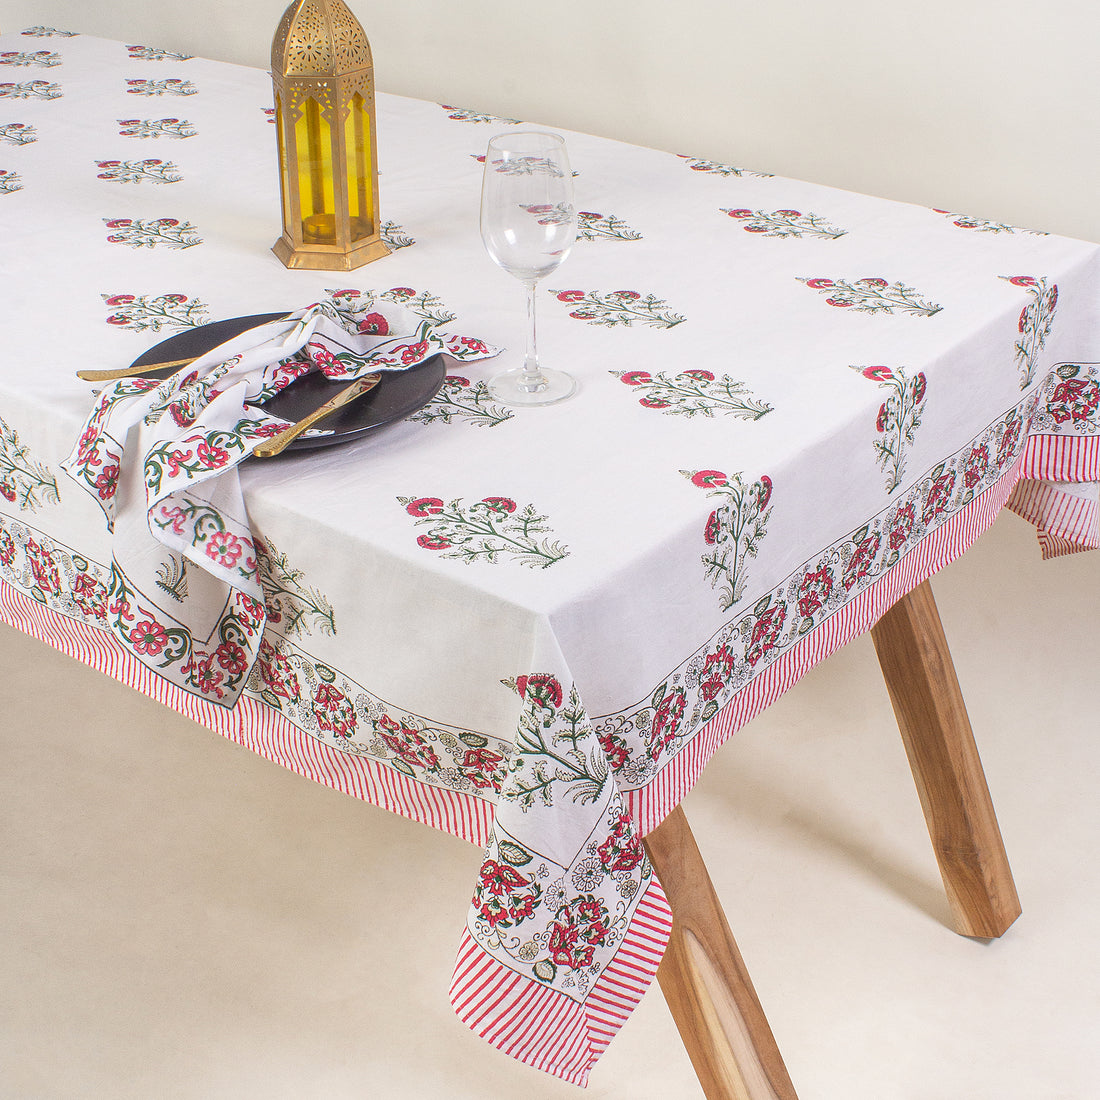 Boota Floral Block Print Cotton Modern Dining Table Cover Online